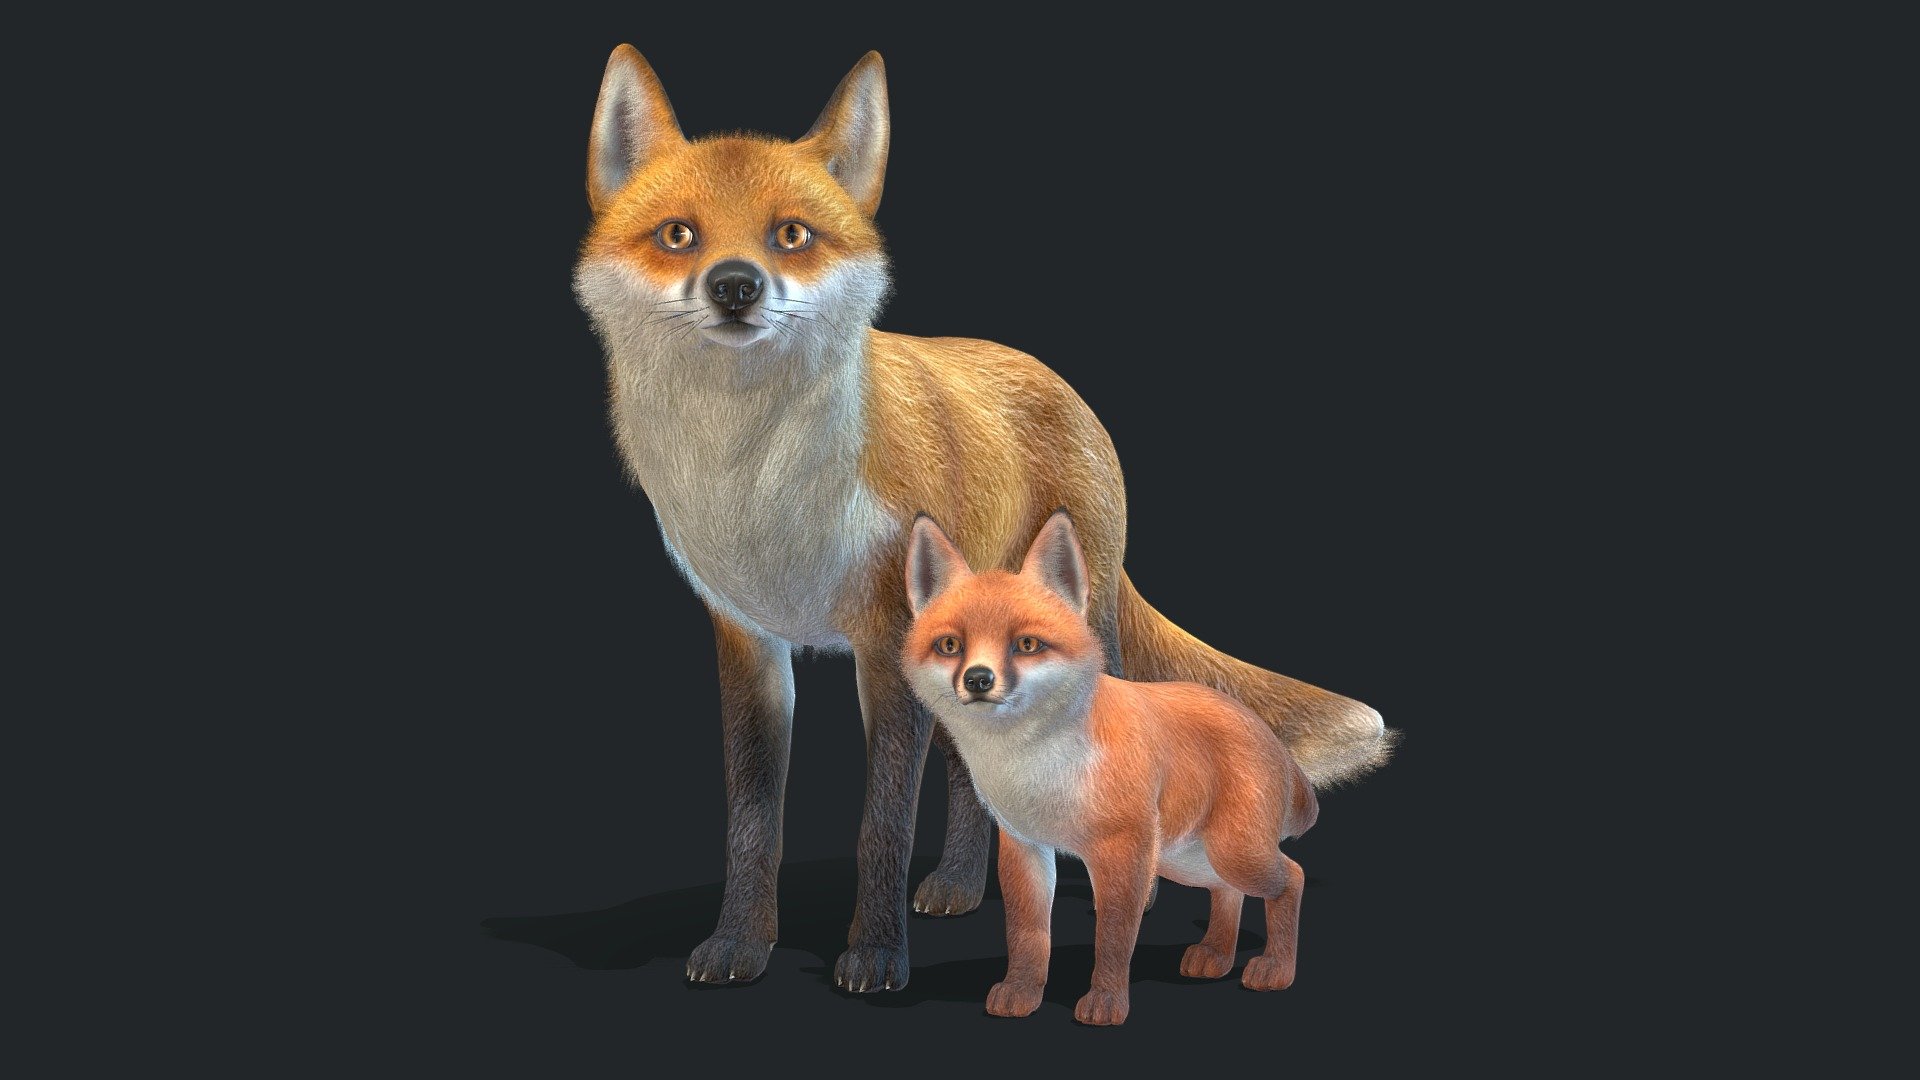 All files with animations are in the attached archive.

This asset includes:
- adult fox
- fox cub

If you have questions, write to me 3d model